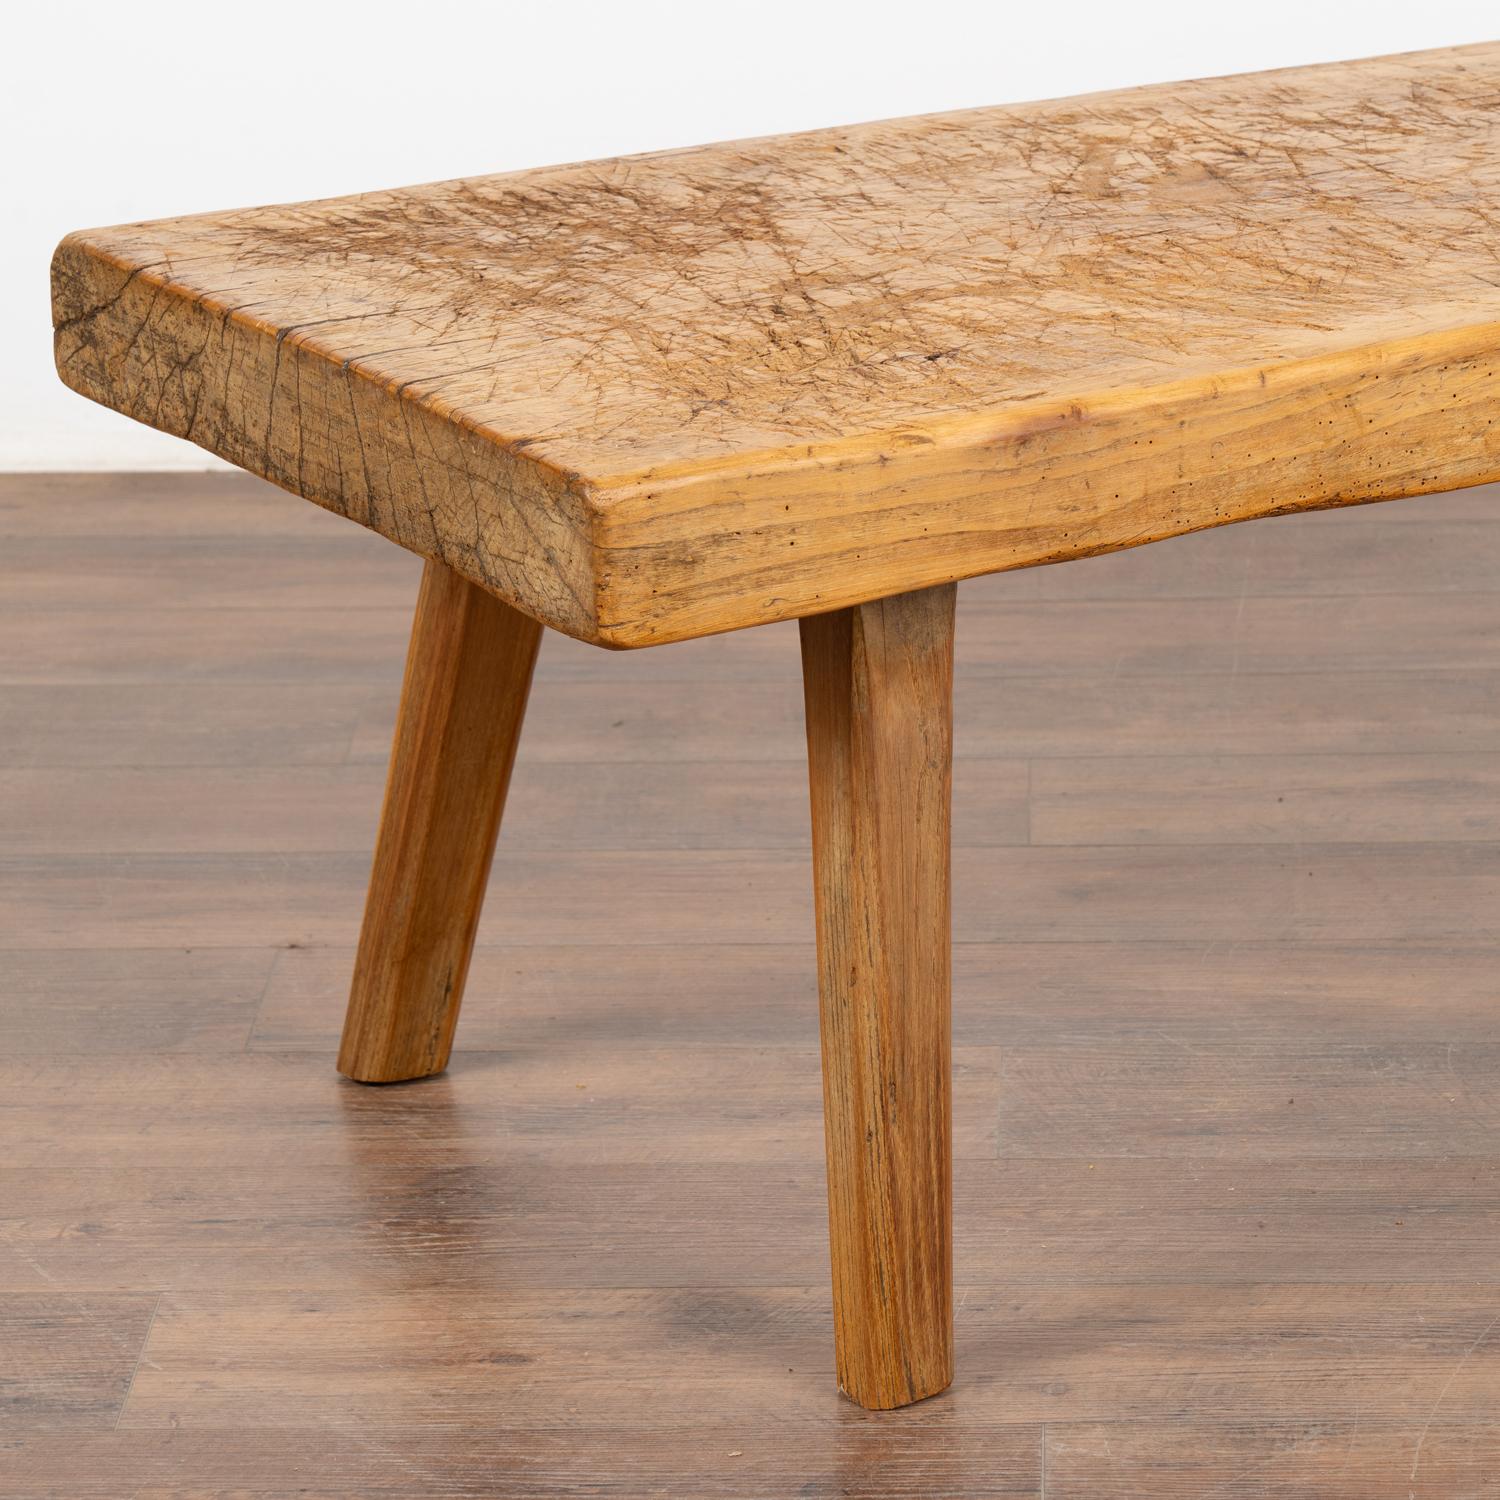 19th Century Rustic Coffee Table from Hungary, circa 1890 For Sale